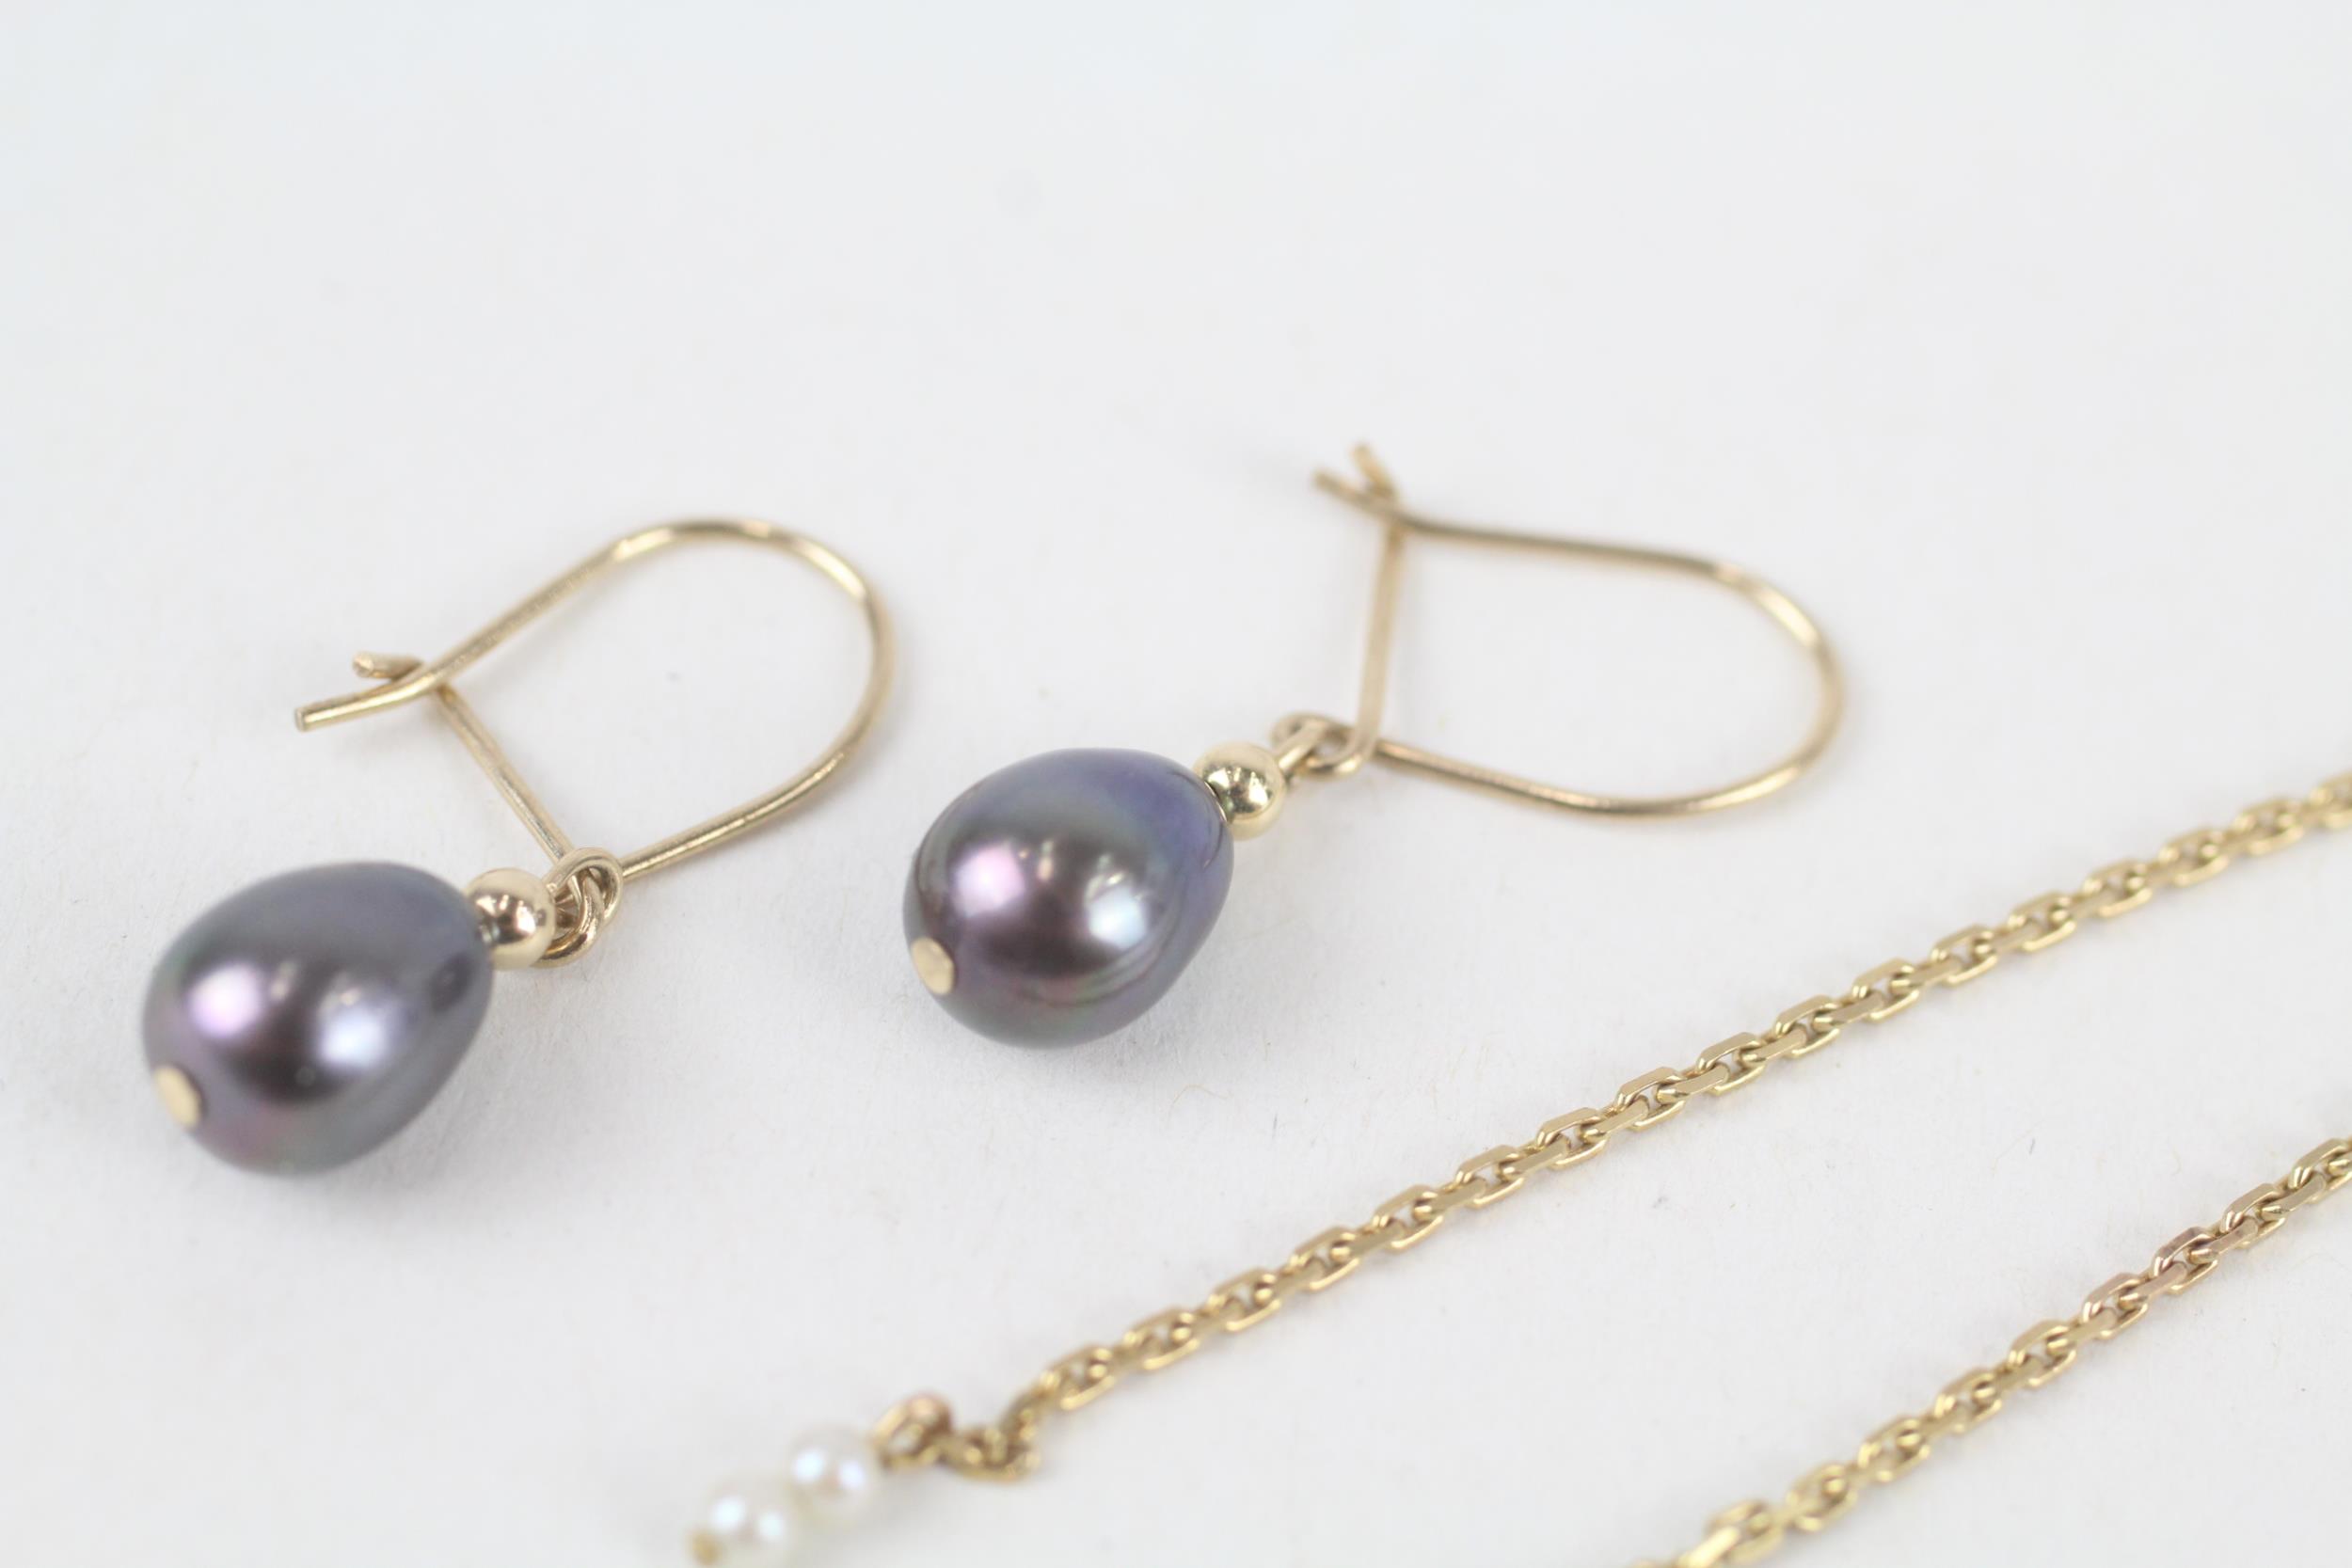 2 x 9ct gold cultured pearl drop earrings - Image 3 of 6